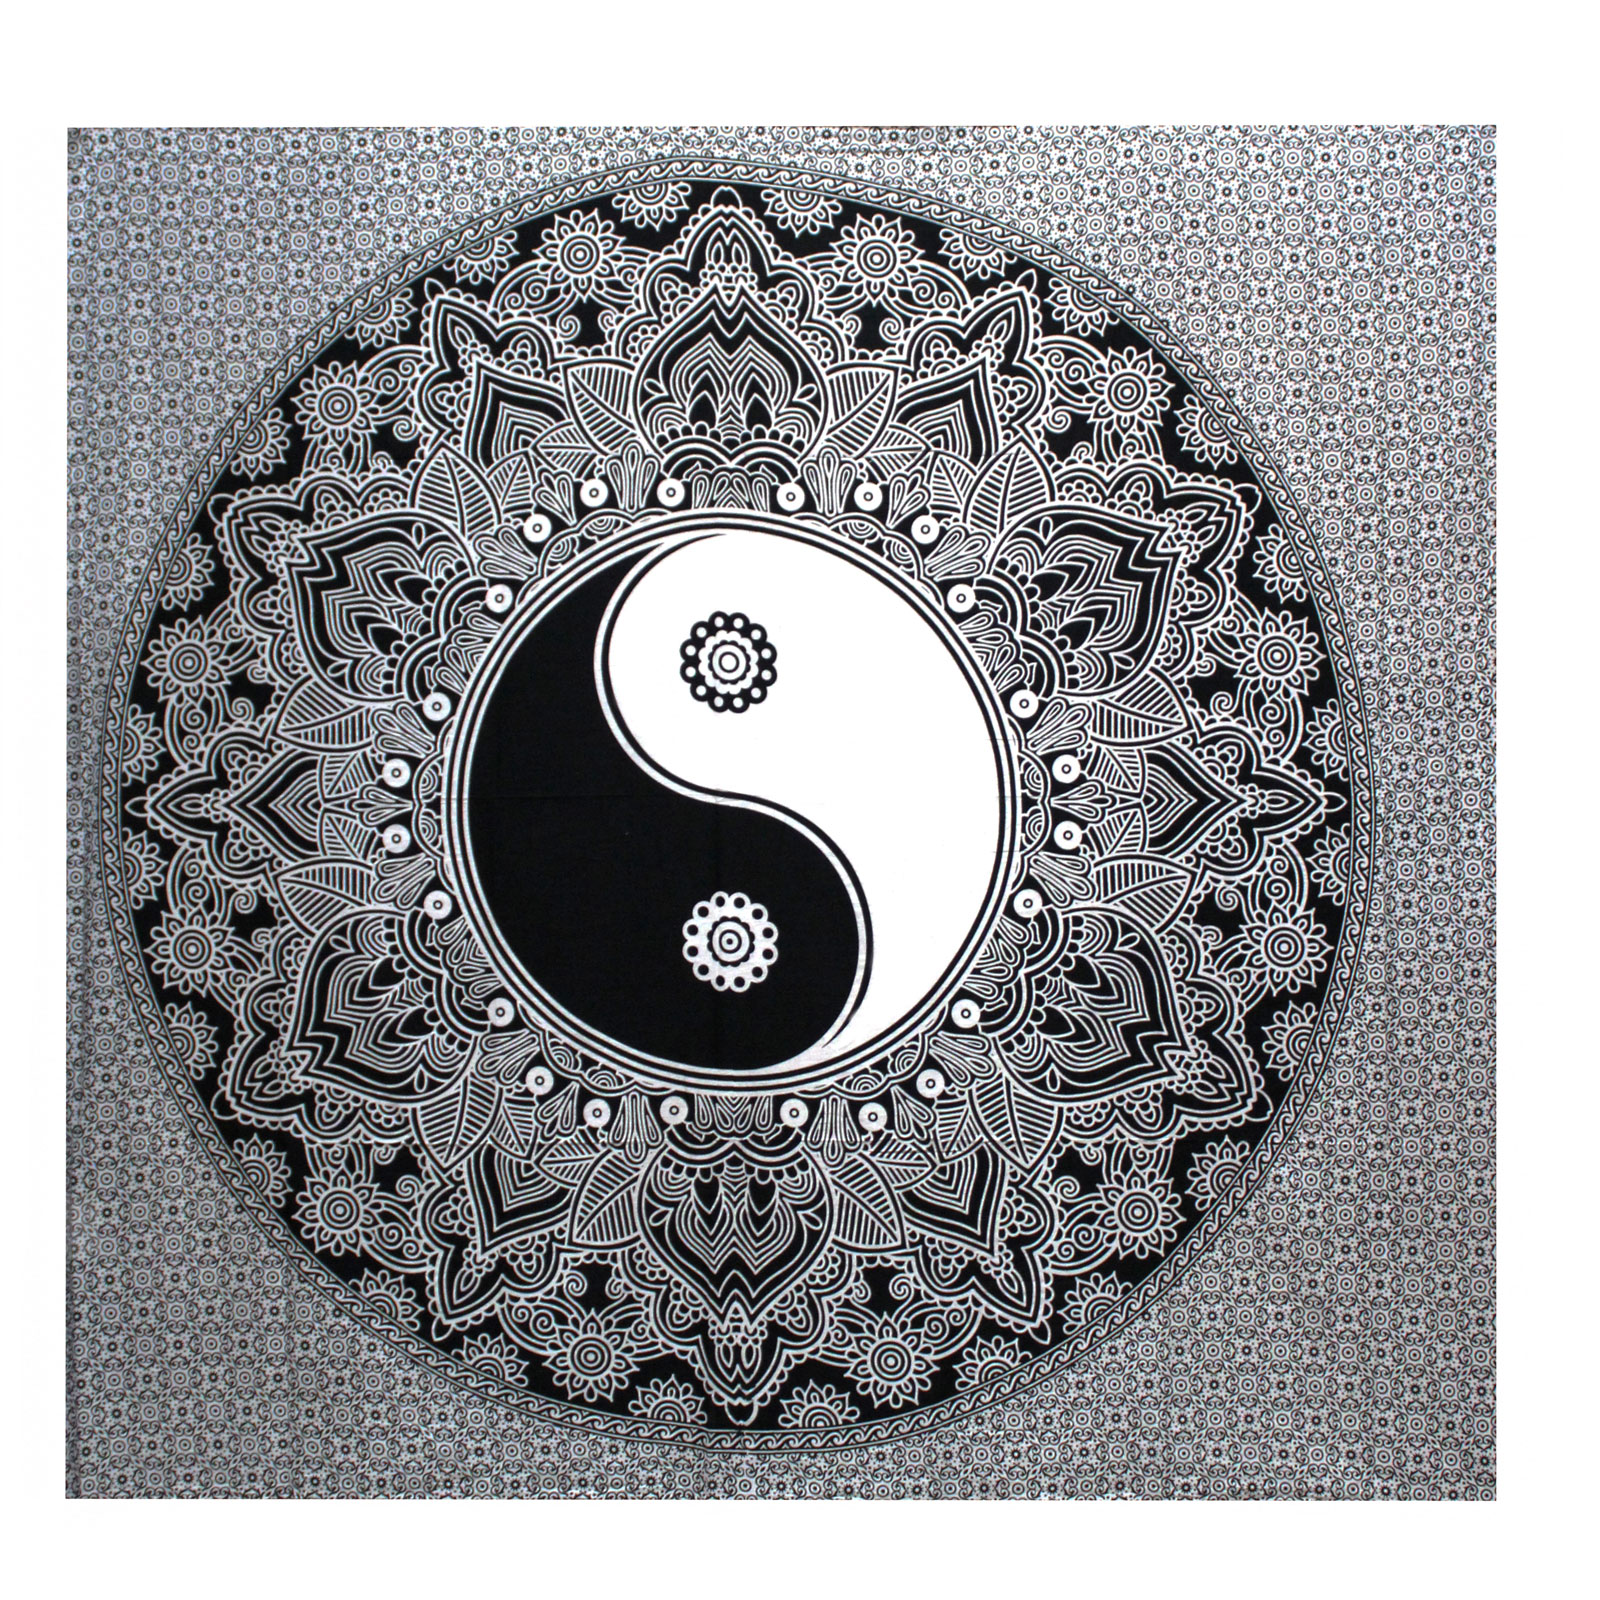 B&W Double Cotton Bedspread Wall Hanging - Ying yang - Click Image to Close